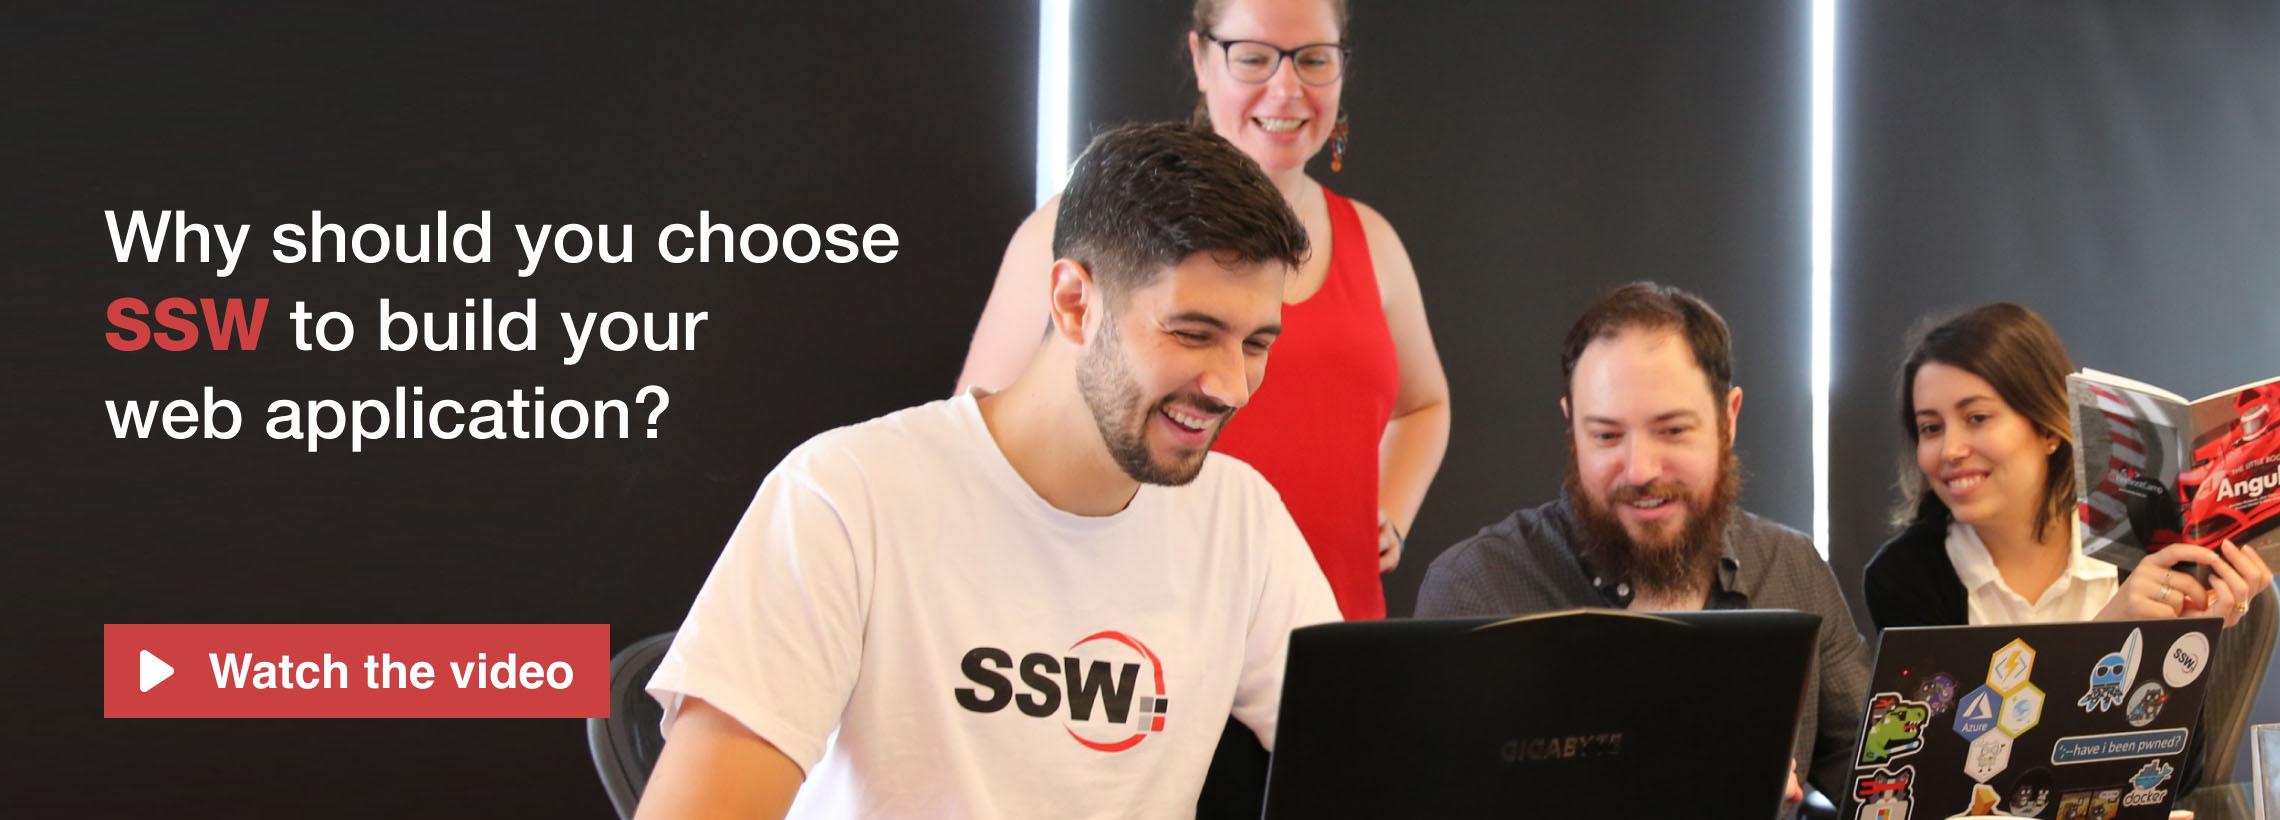 Why should you choose to build your SSW web application?